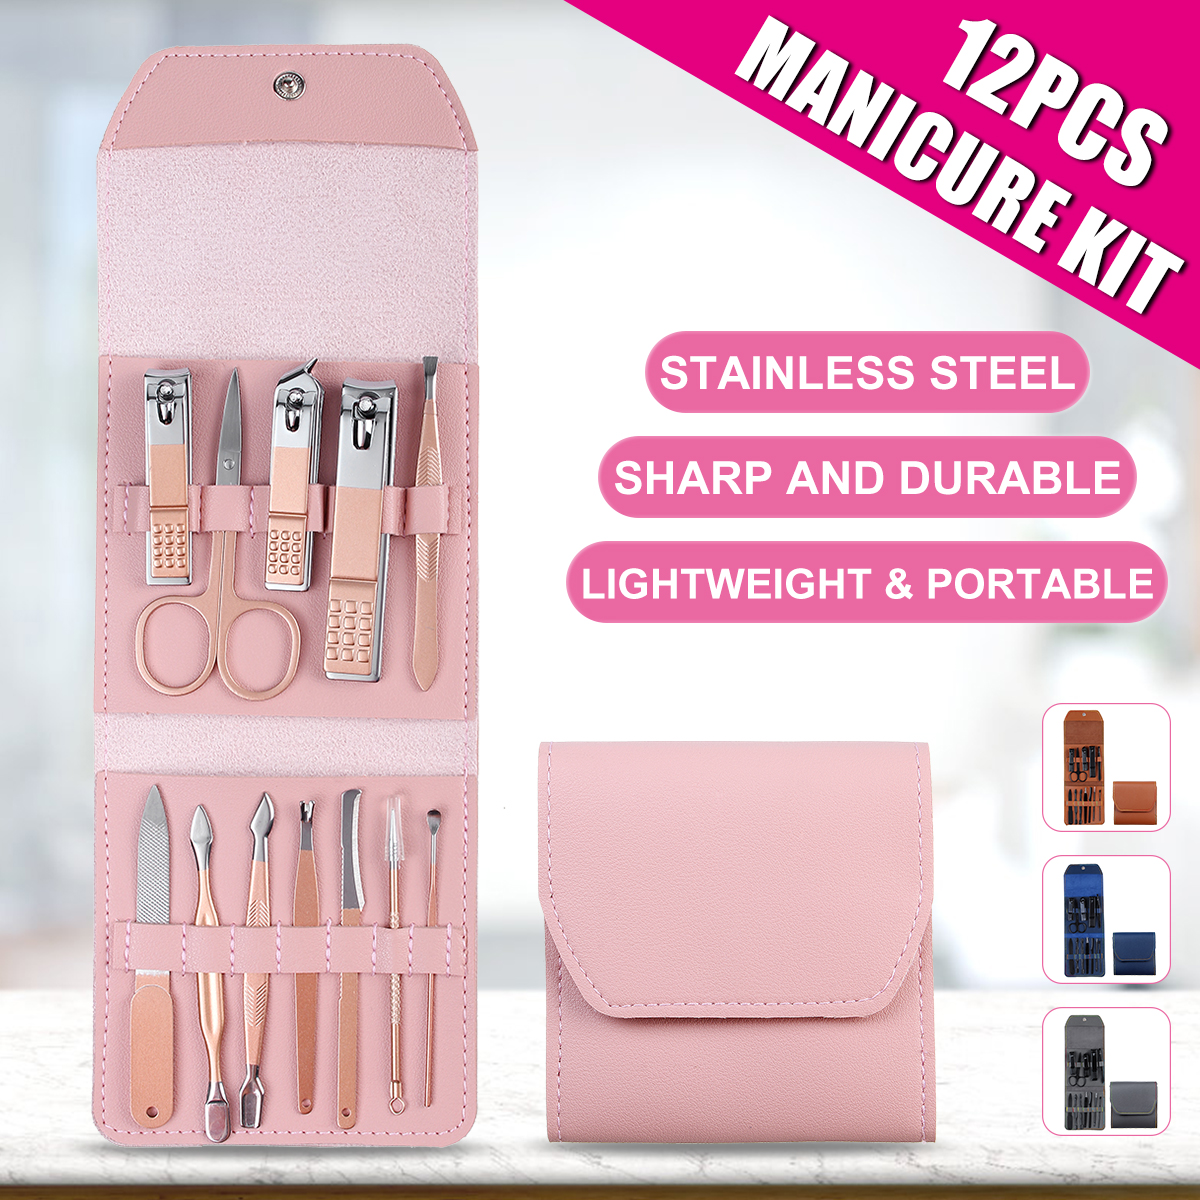 12PCS-Stainless-Steel-Pedicure-Nail-Clipper-Set-Professional-Manicure-Beauty-Tools-Kit-Cuticle-Eagle-1709212-2